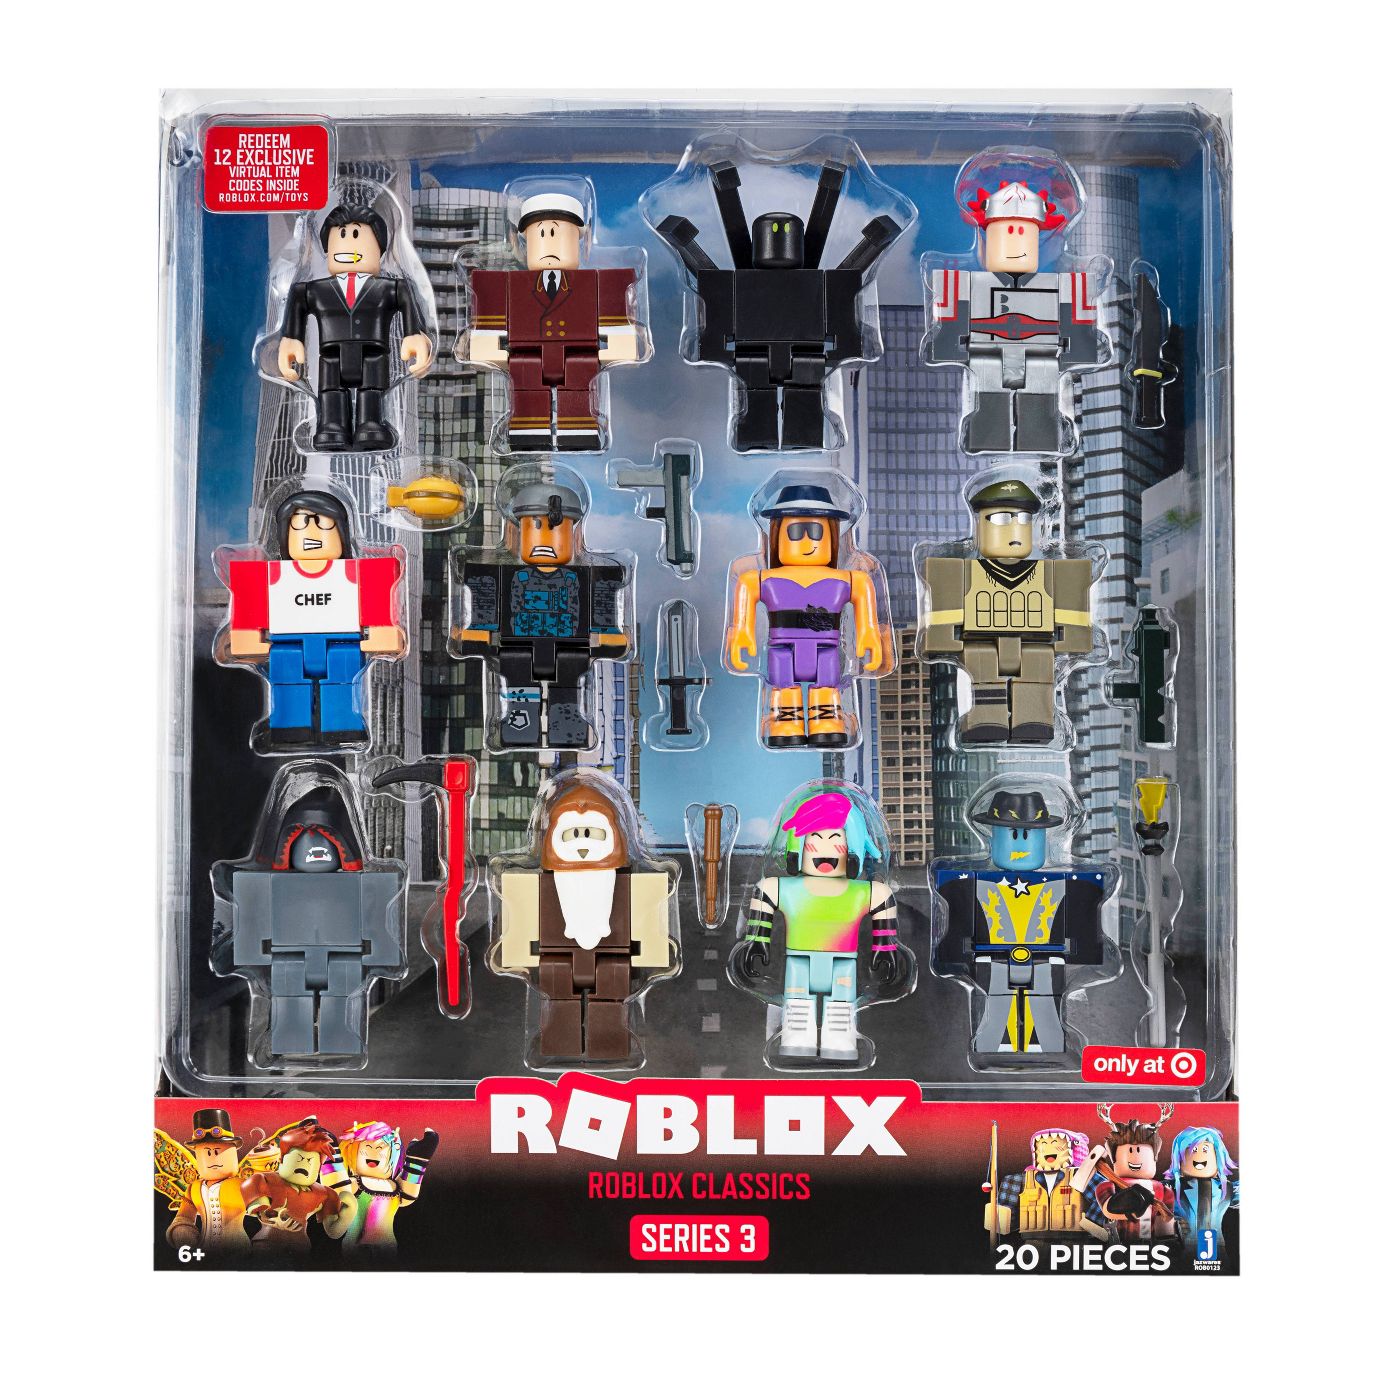 Roblox 12 Mystery Figures Series 3 New Toys Bundle Limited Set Lot 22pc No Codes Action Figures Tv Movie Video Games - black butler roblox decal id